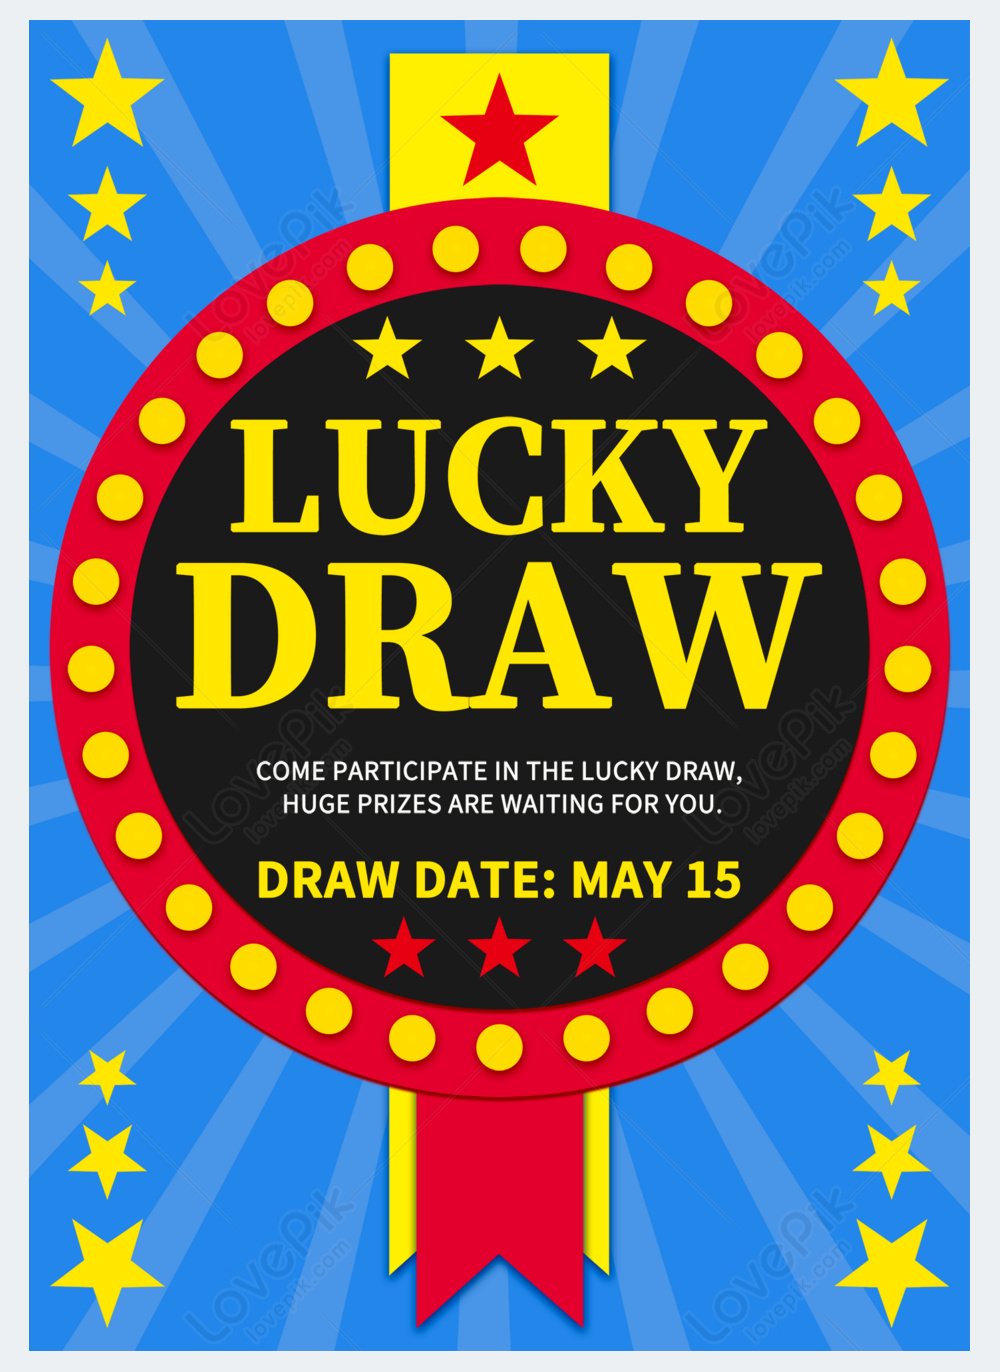 Lucky Draw Coupon Cdr File Template Free Download | Graficsea